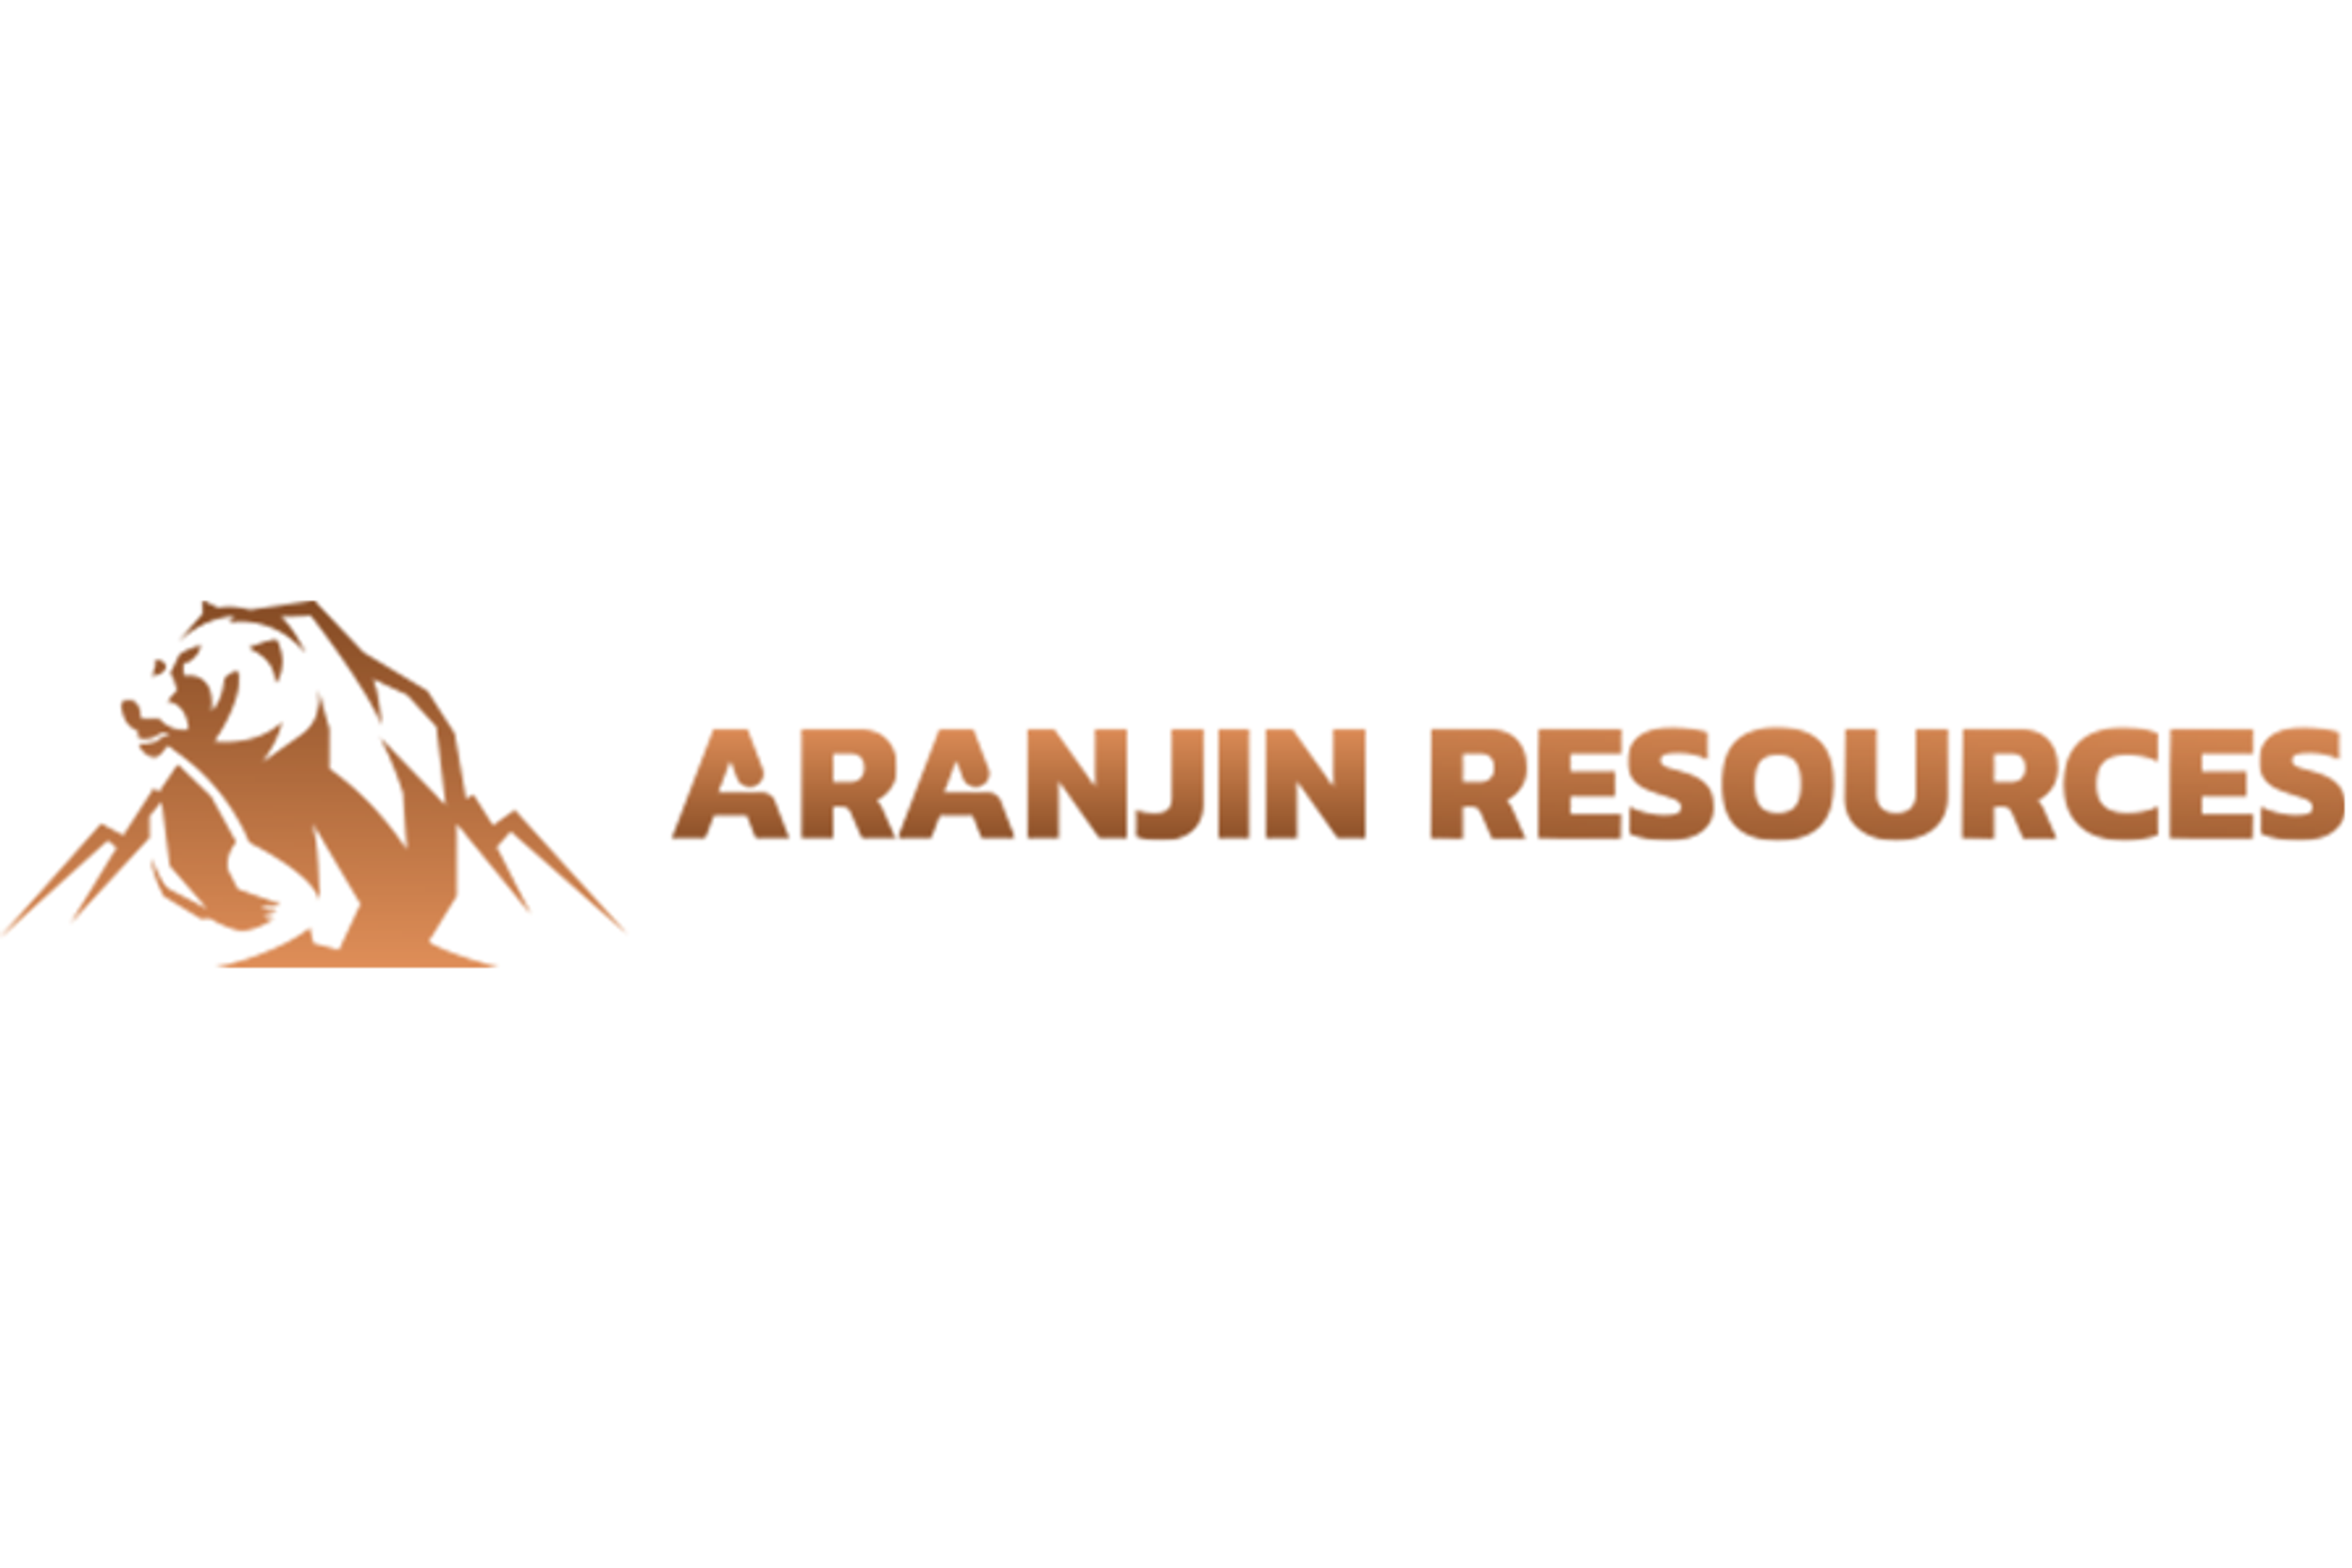 Aranjin Commences Exploration at the Baavhai Uul Copper Nickel Discovery